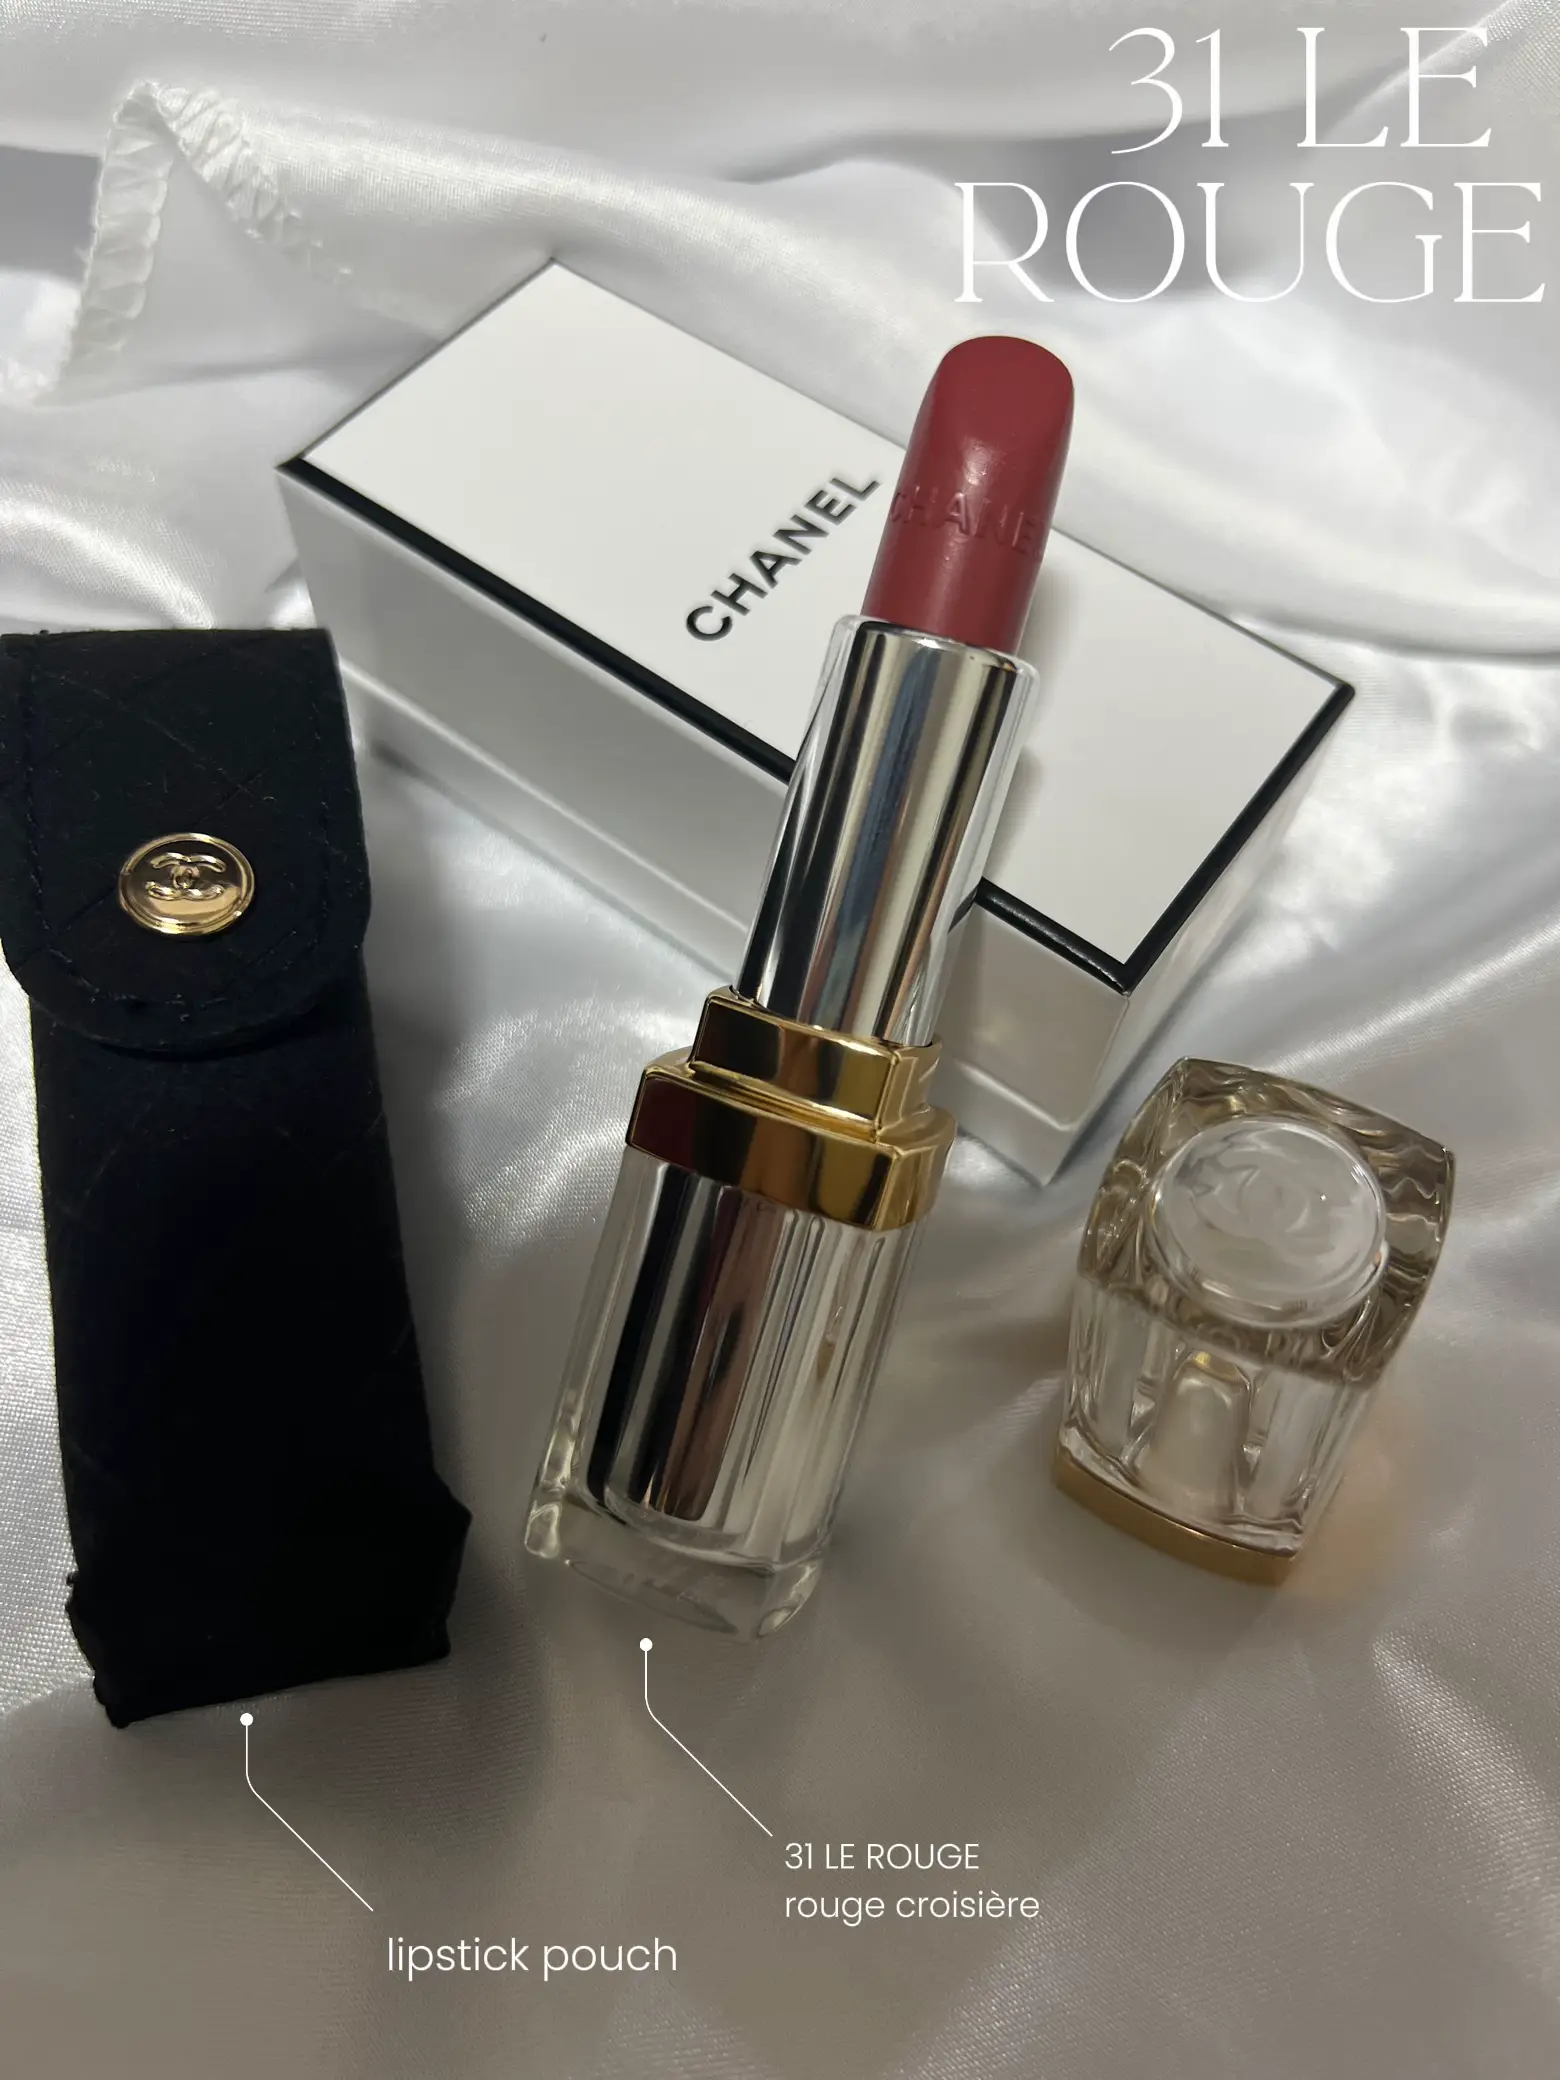 $200+ for 1 Lipstick?! Worth it?, Gallery posted by Joanne